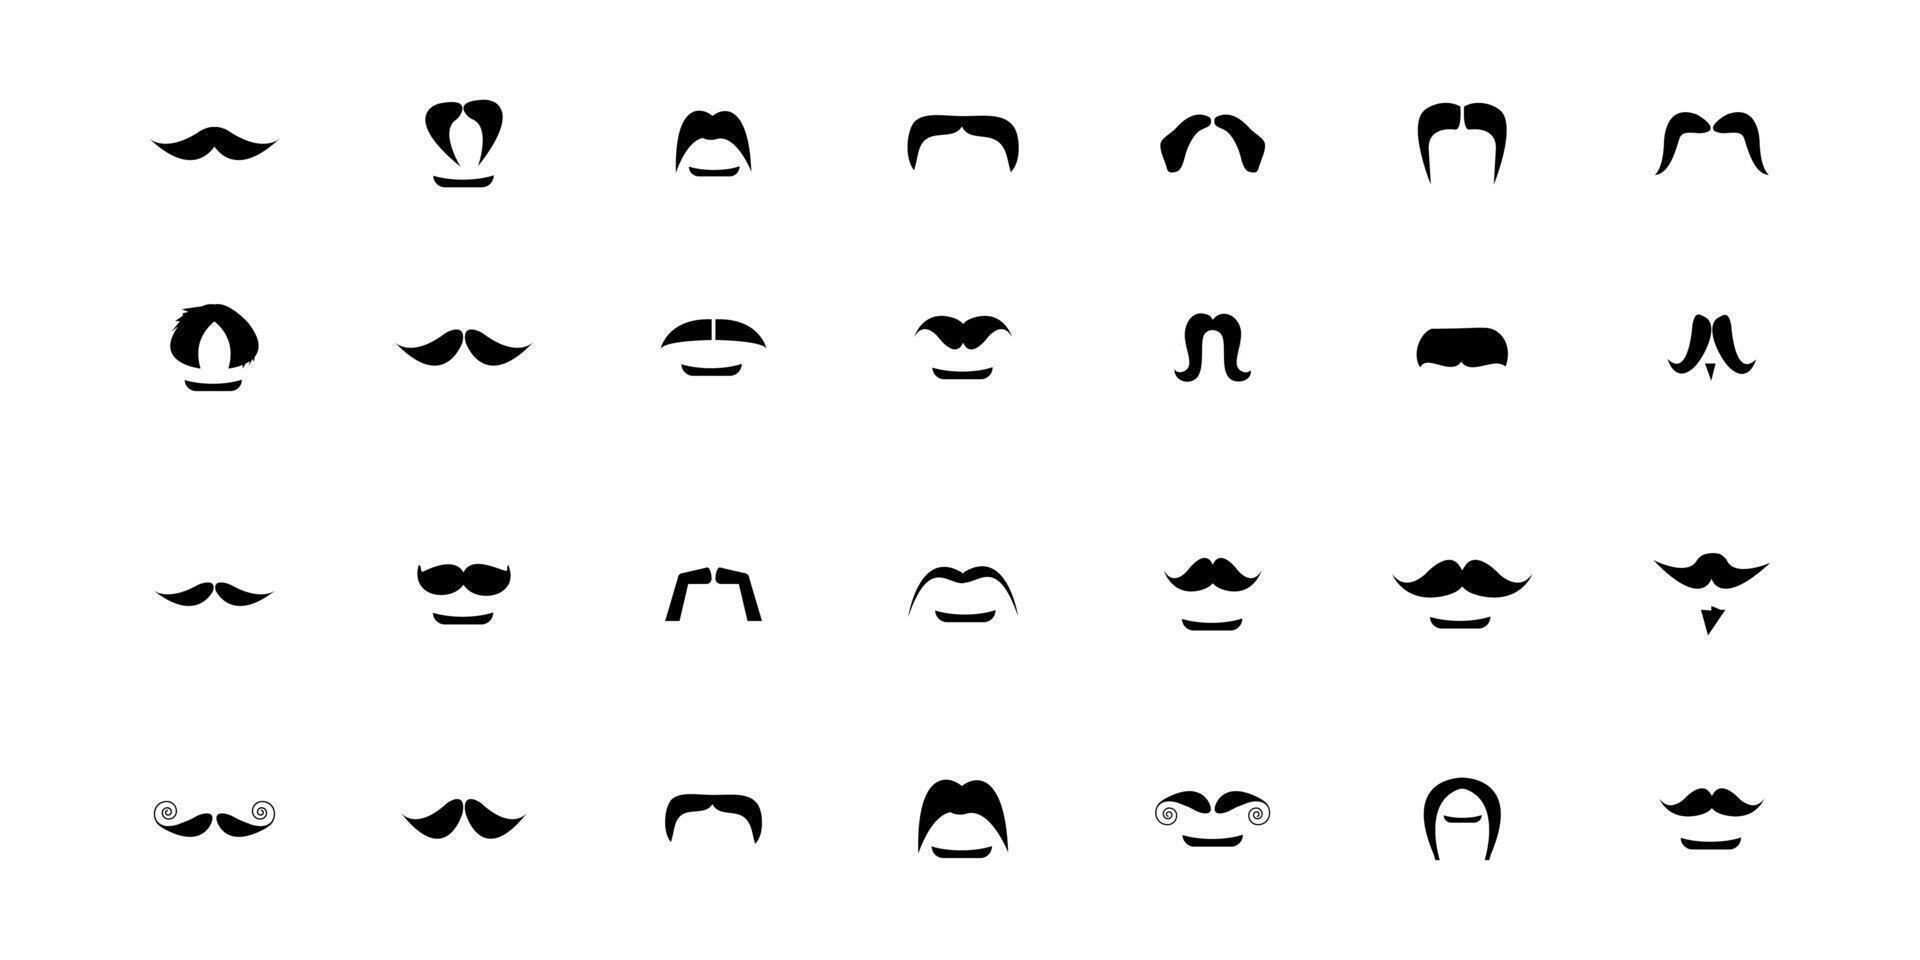 Mustache icon collection. Set of black man mustache icons vector